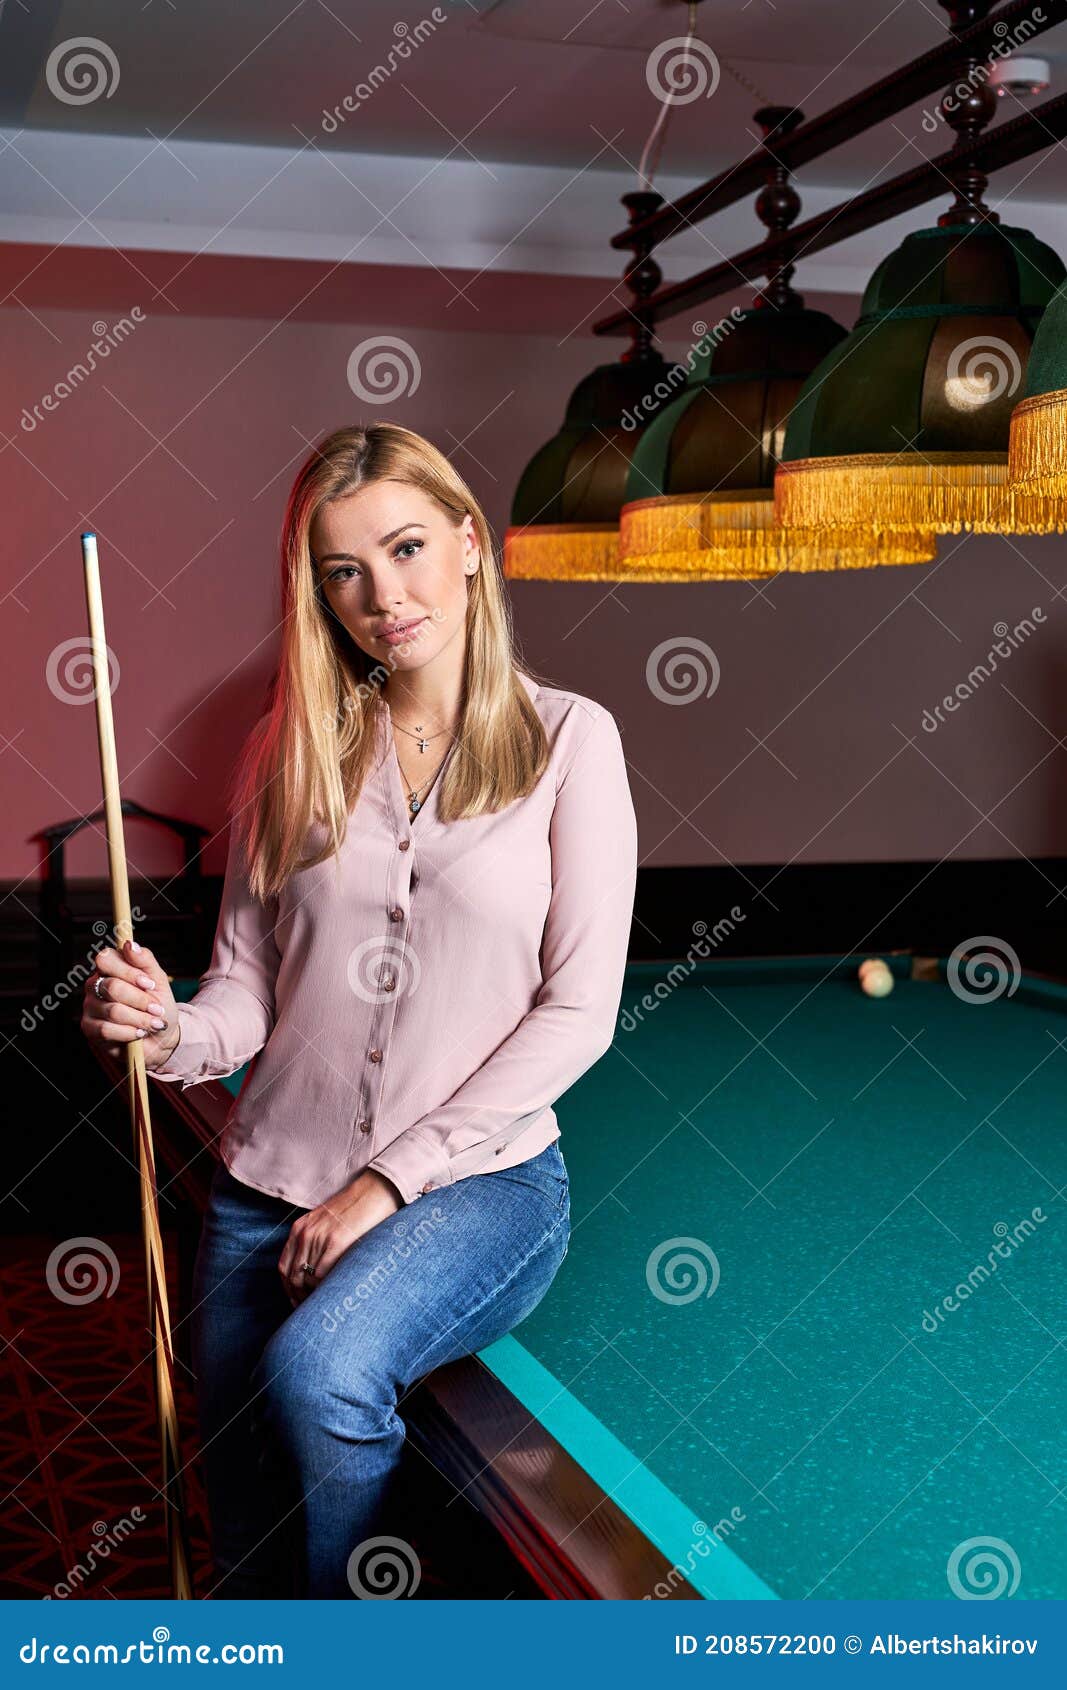 Adorable Blond Female Came To Spend Pleasant Time Playing Snooker Stock Photo